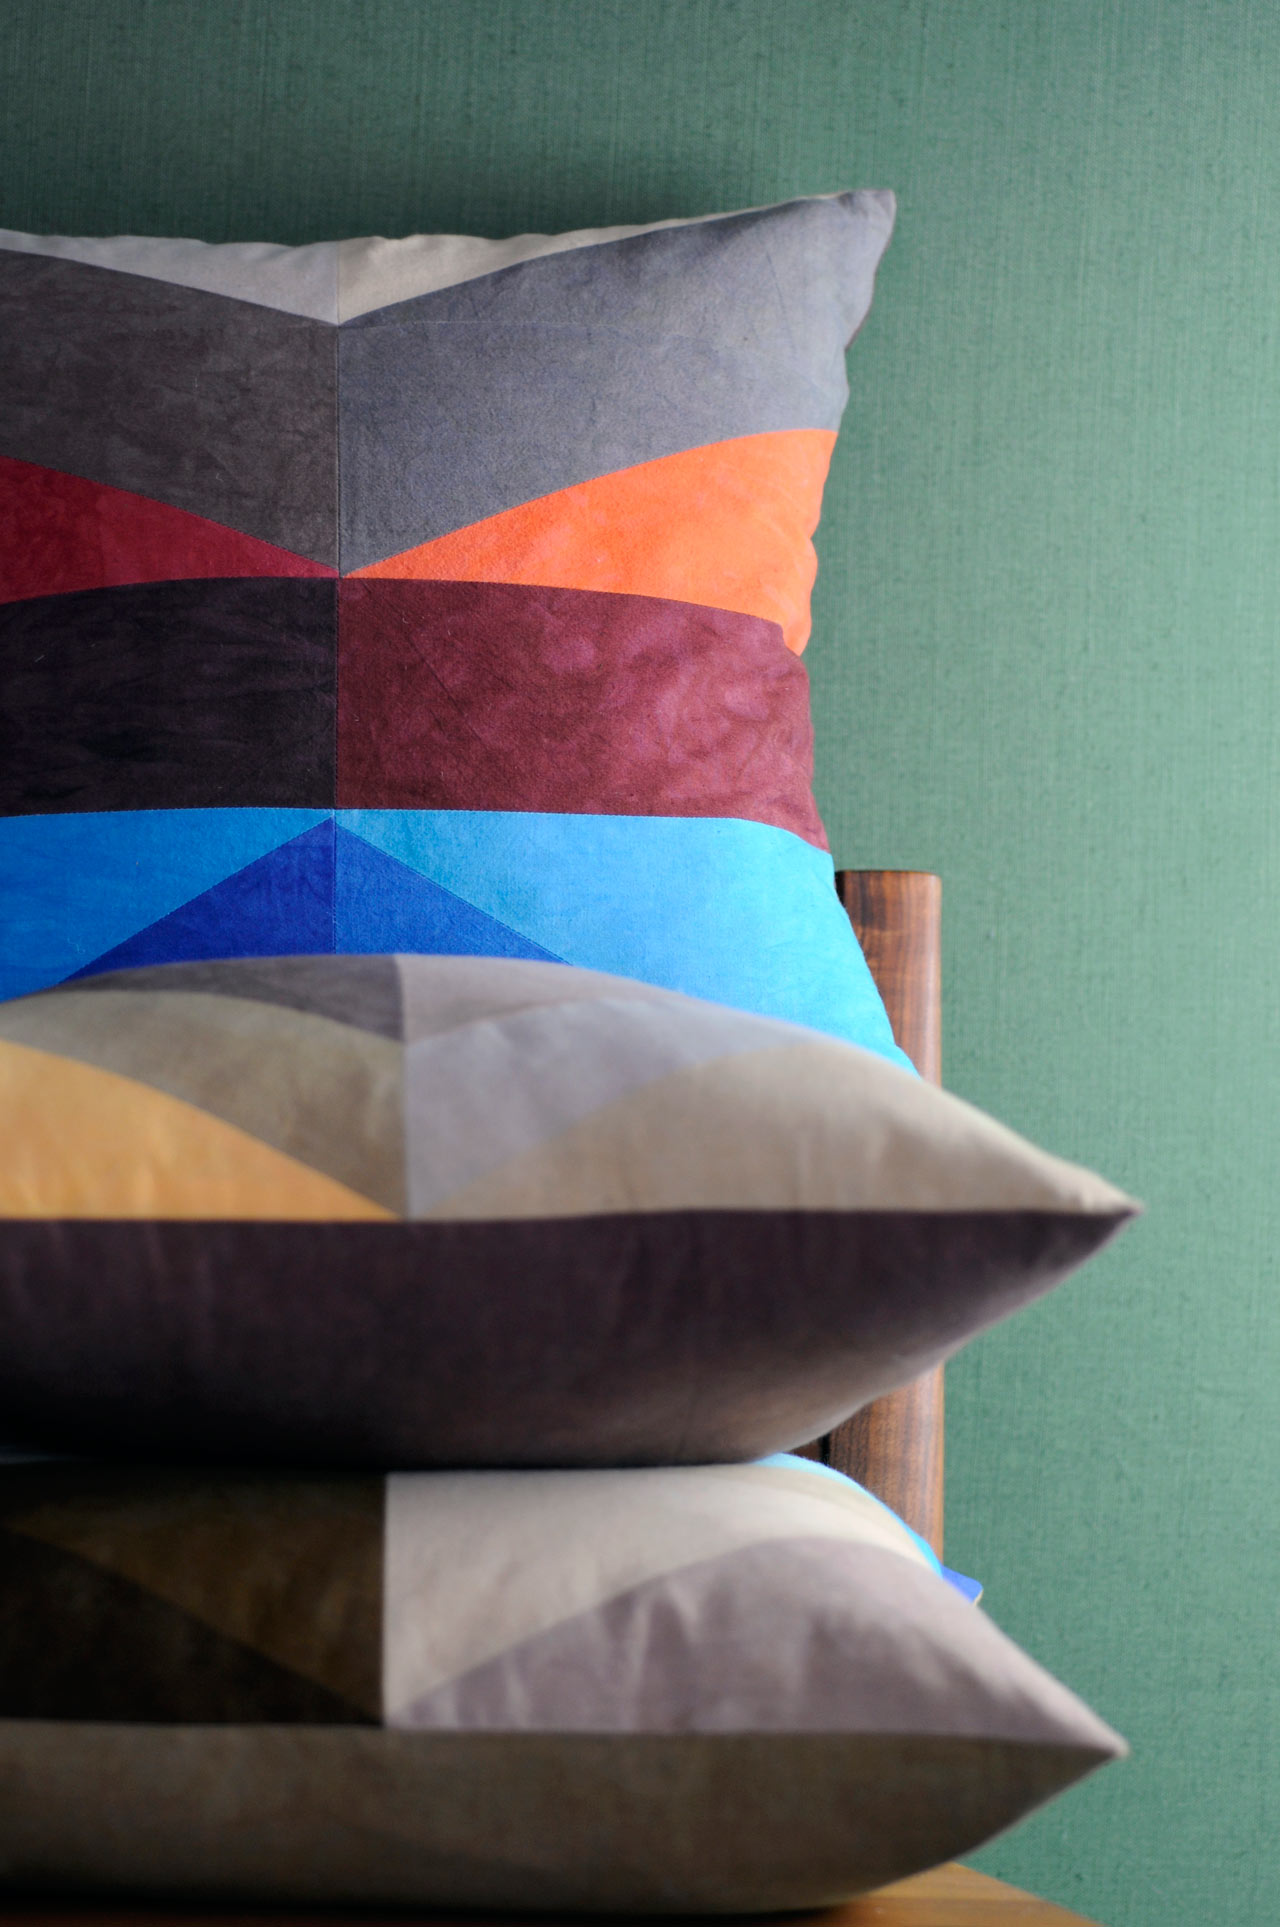 Studio DUNN Releases New Geometric Pillows Inspired by New England